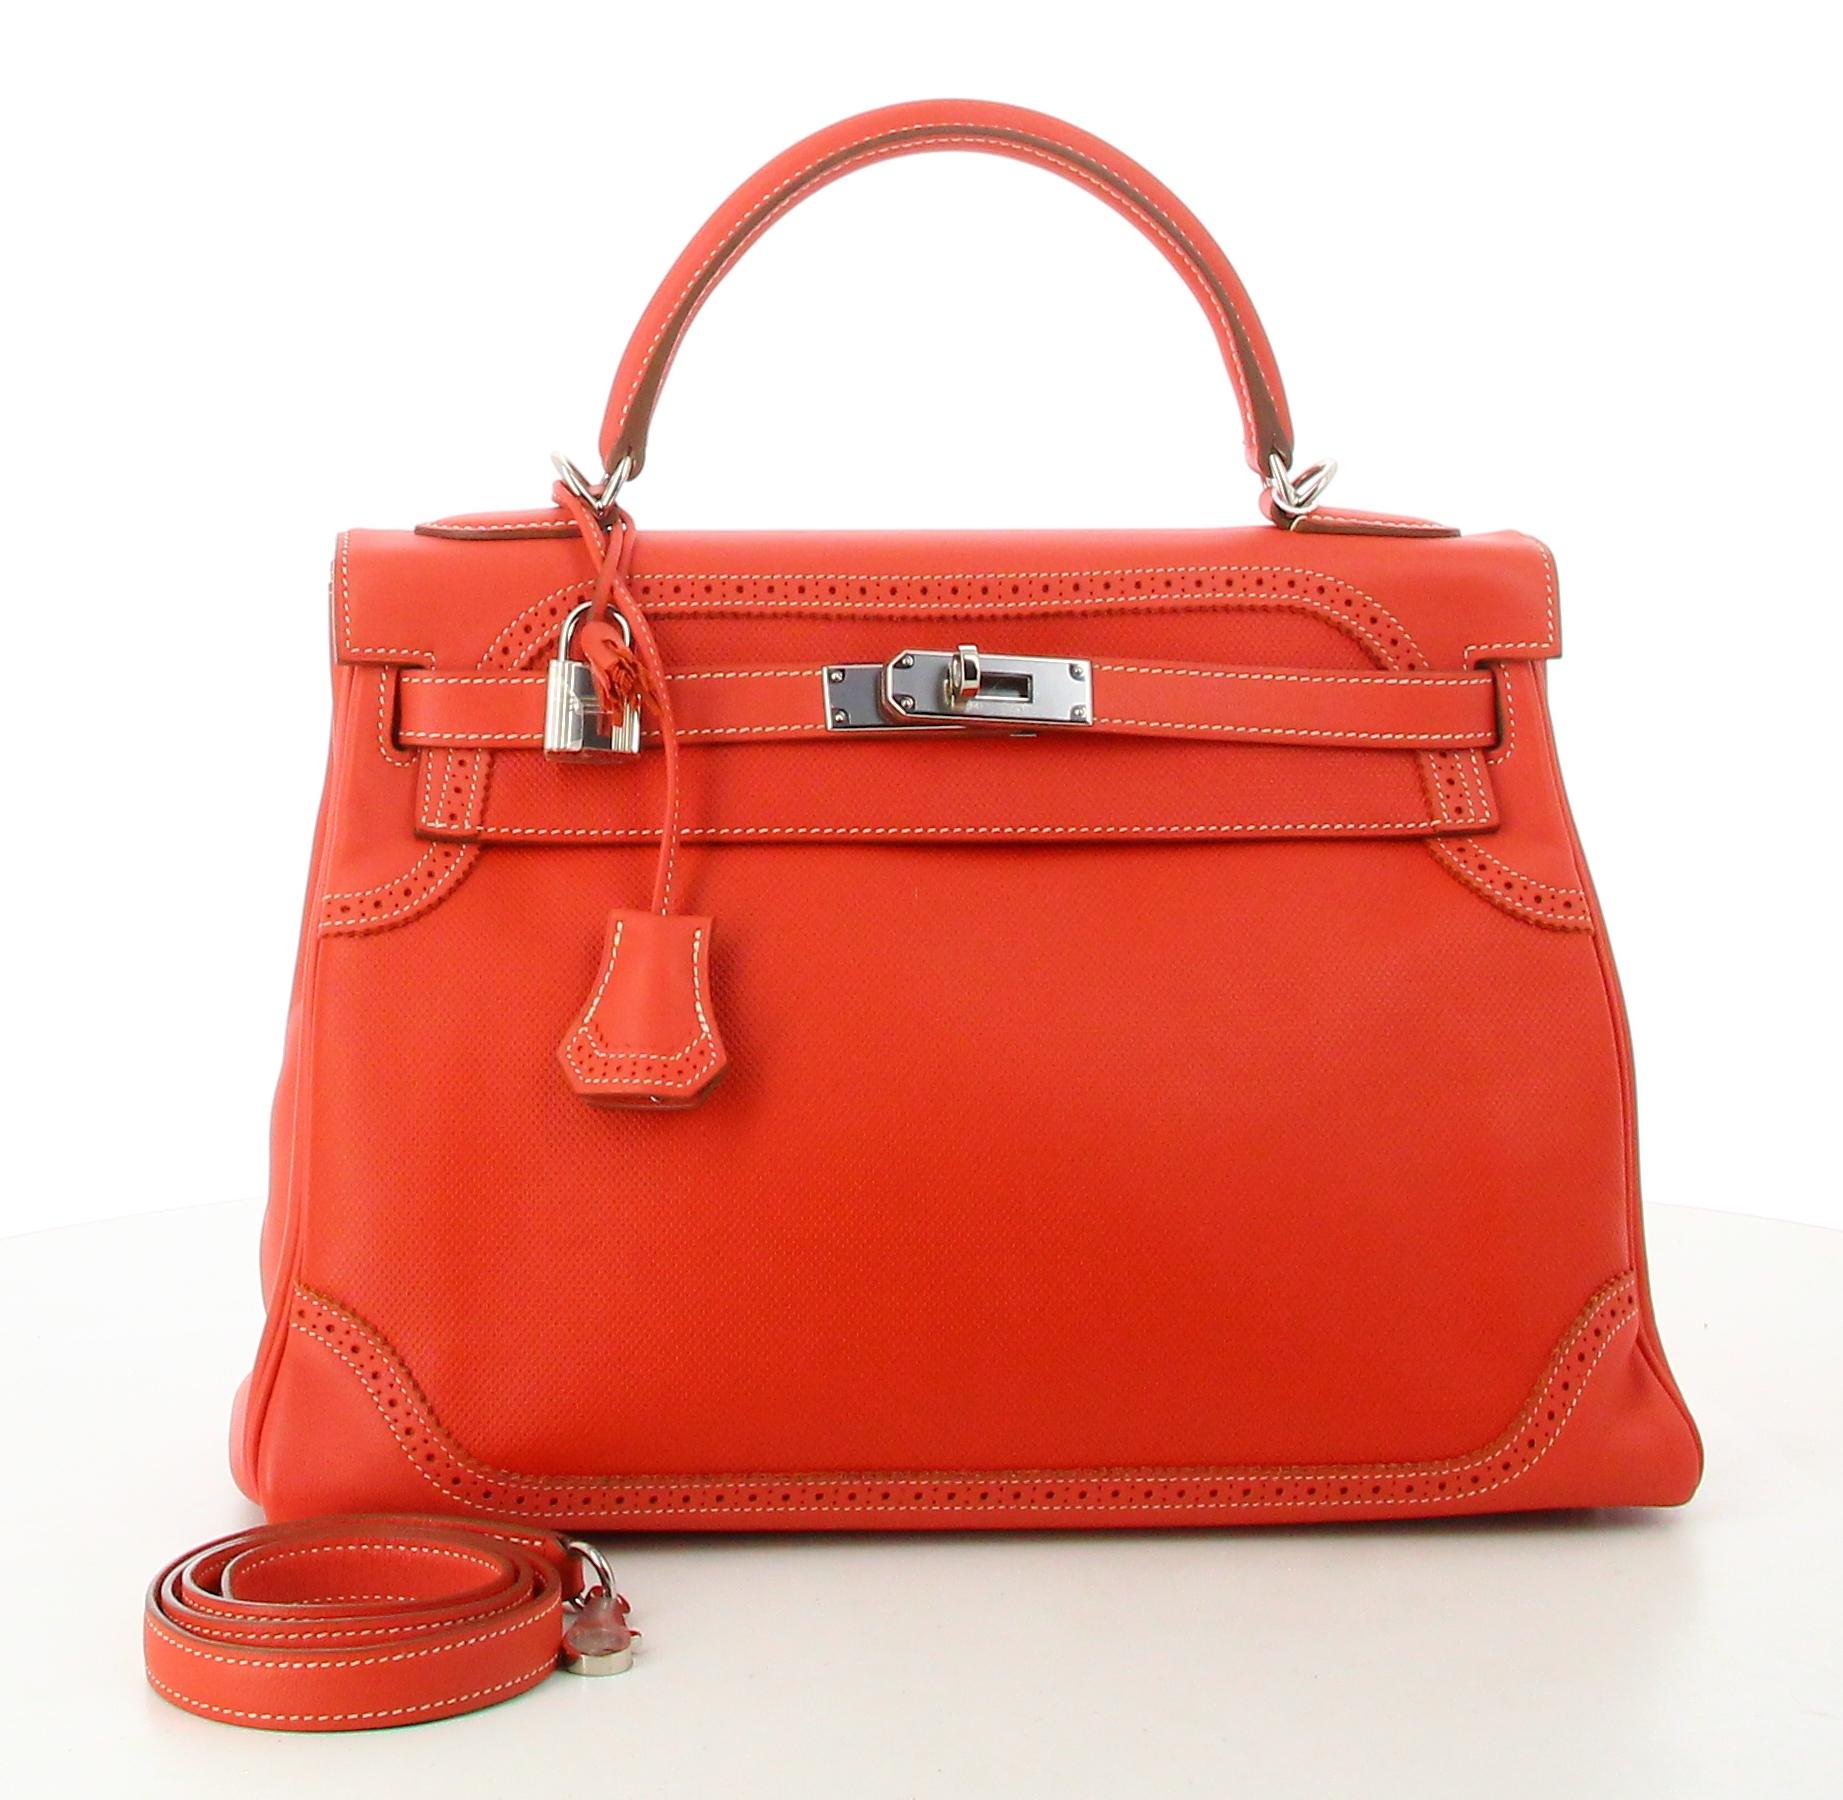 Rare et collectible Hermes Ghillies in Swift Leather.
Really good preowned condition, comes with ts shoulder strap.
Really rare, designed by pierre Hardy based on the scotish Ghillies shoes.